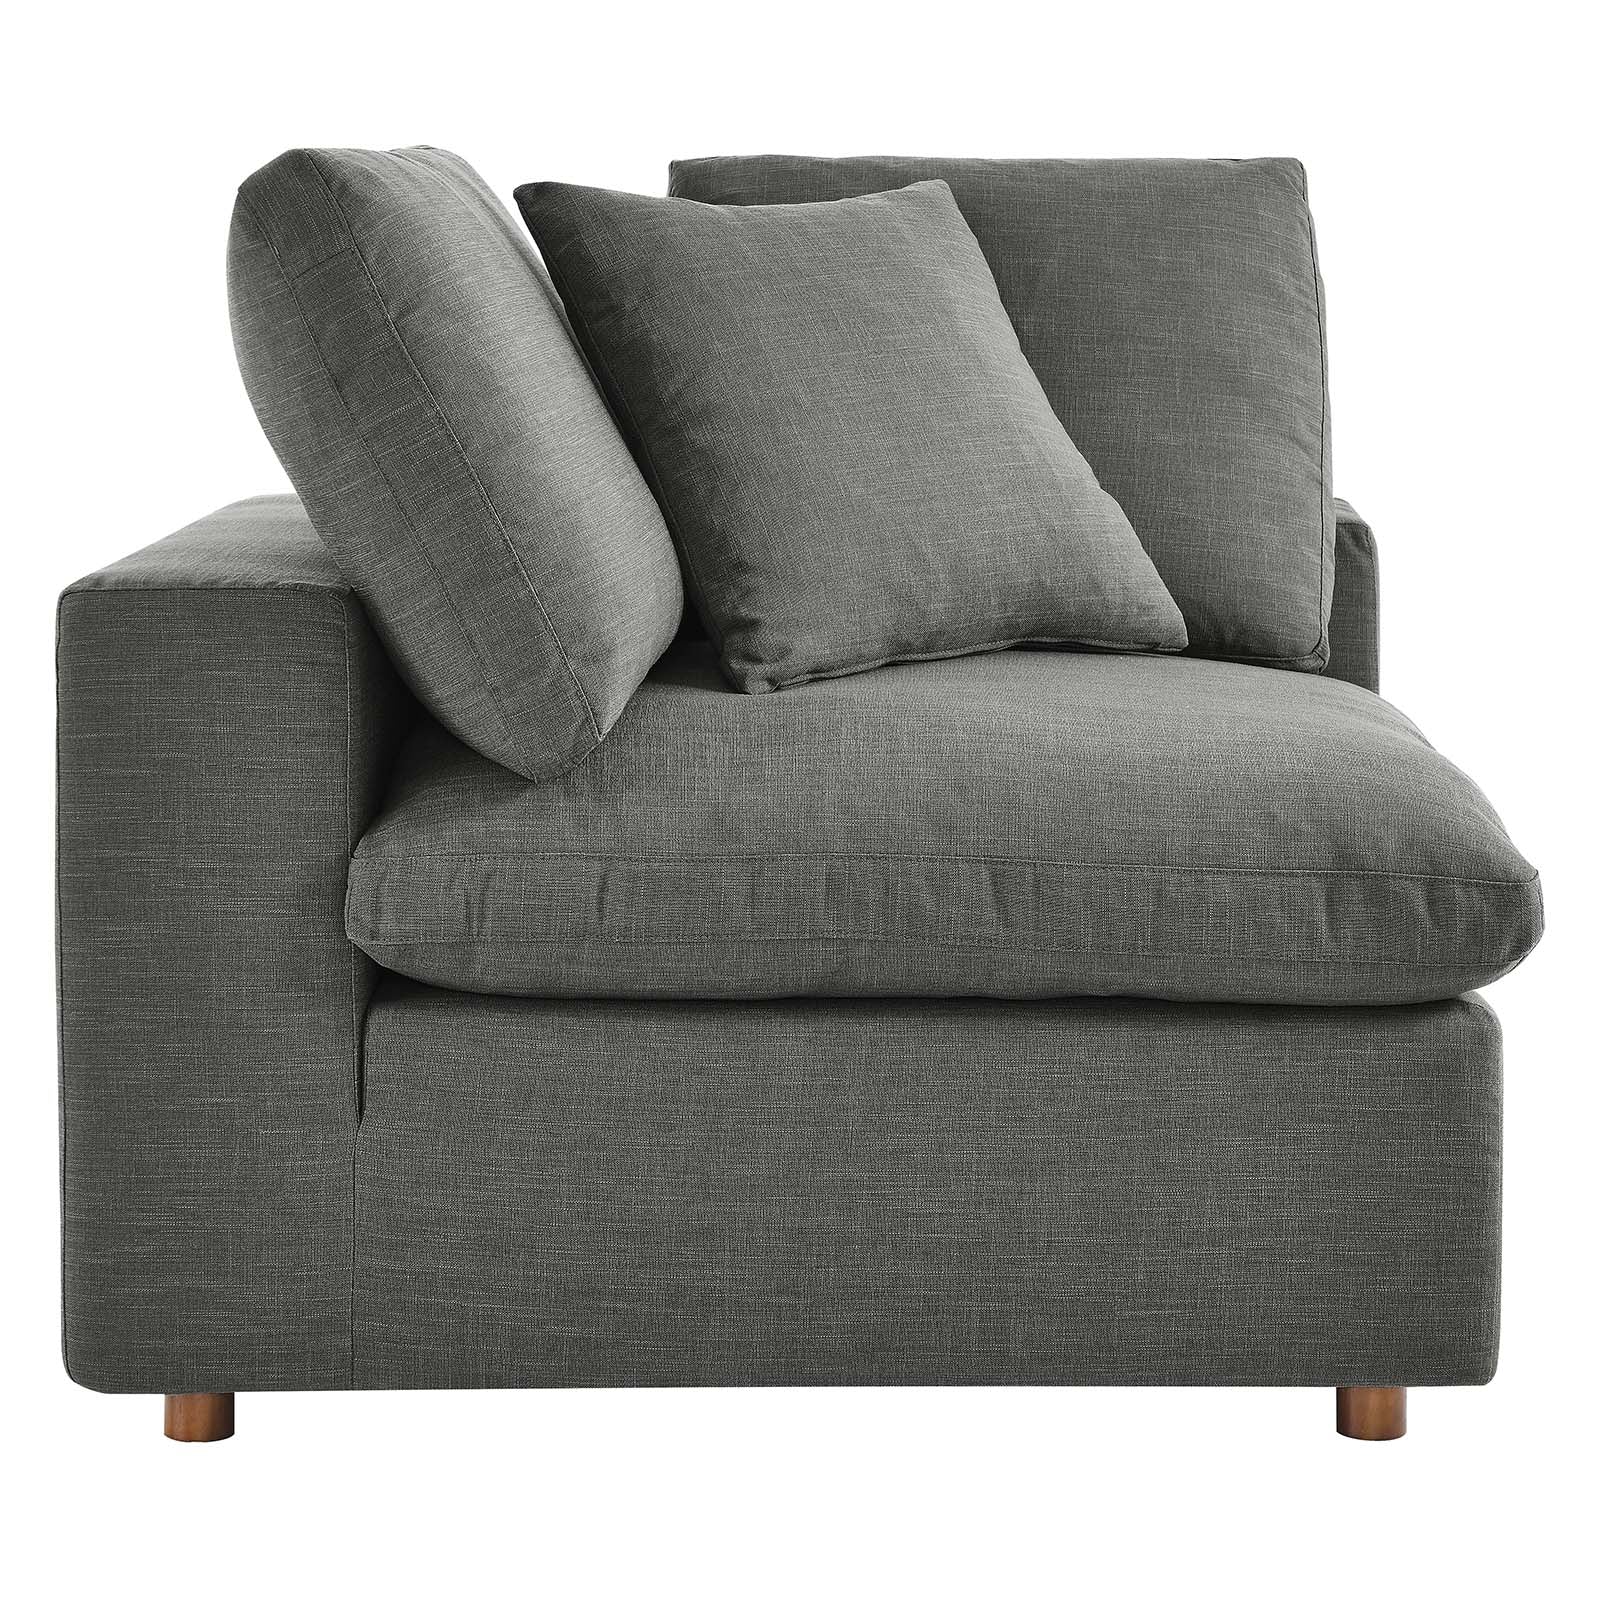 Modway Living Room Sets - Commix Down Filled Overstuffed 5 Piece 118" W Sectional Sofa Set Gray